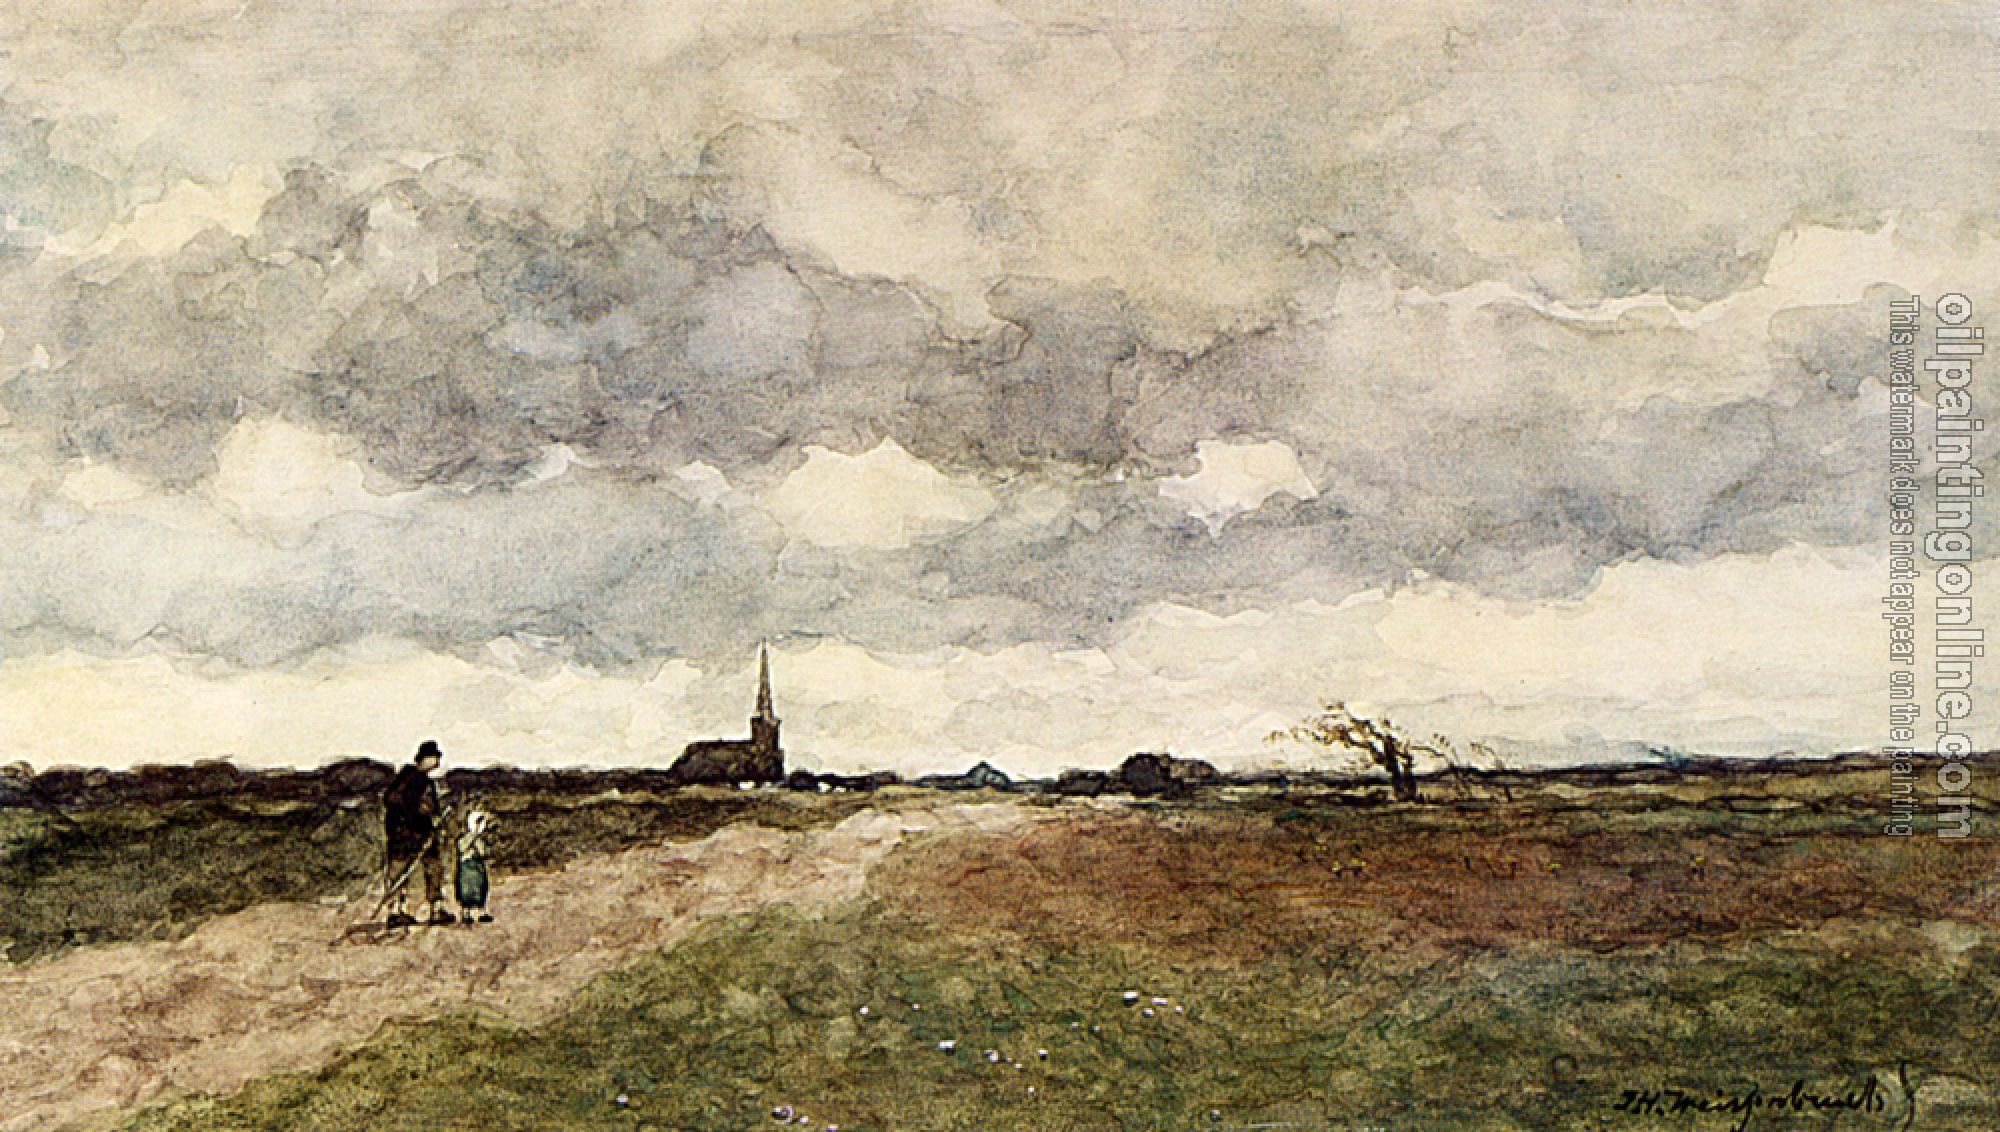 Weissenbruch, Jan Hendrik - Figures On A Country Road A Church In The Distance